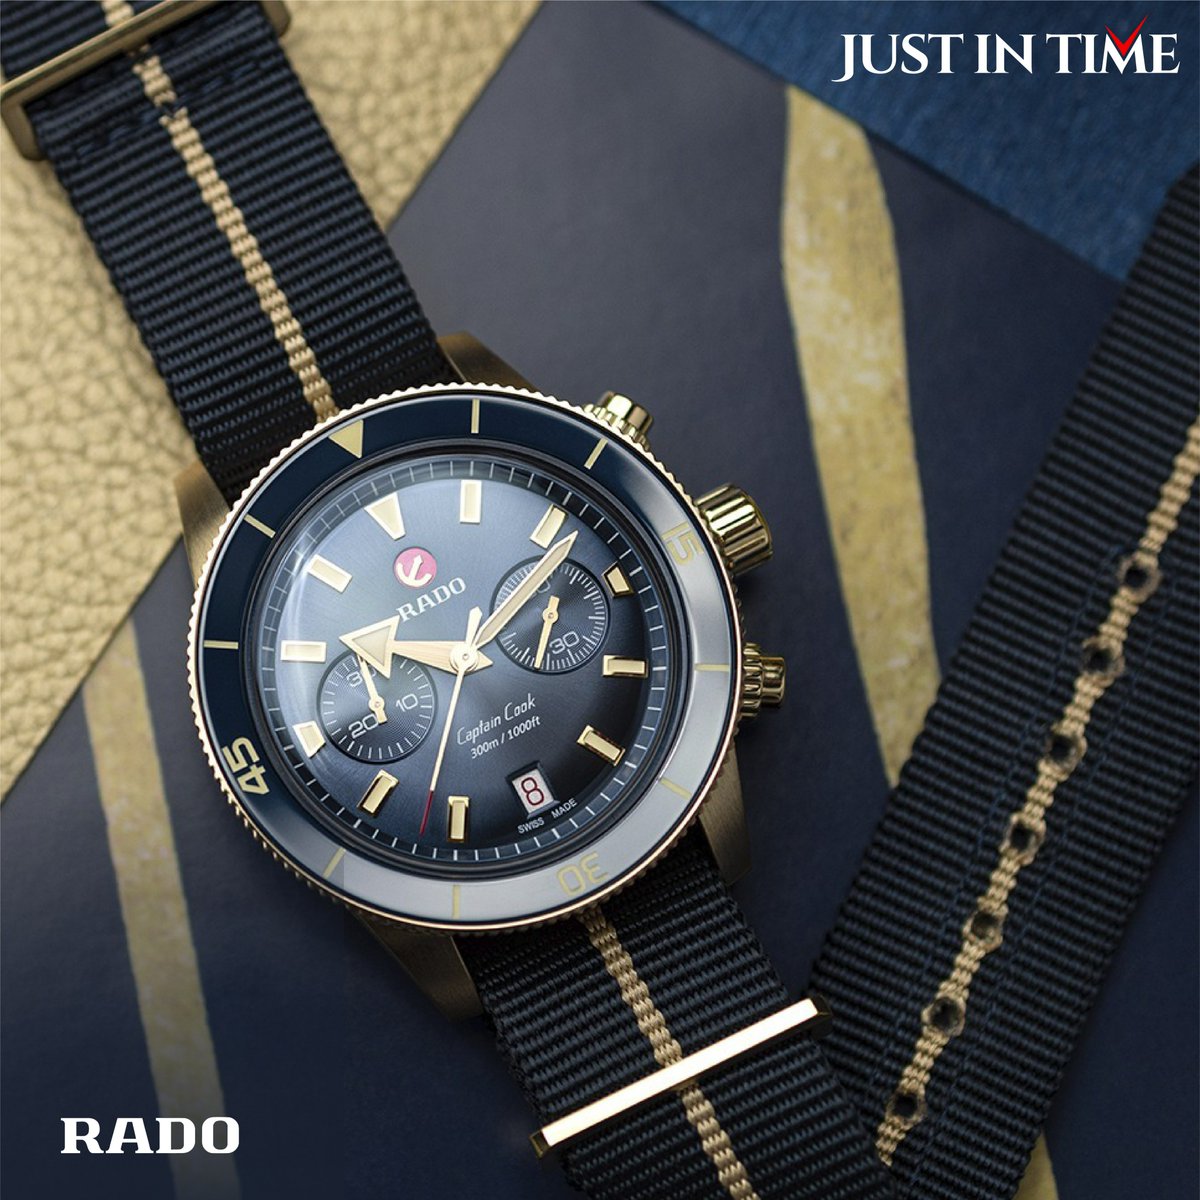 The Captain Cook Chronograph is so versatile; exactly what the situation requires.
.
.
.
#JustInTime #JustInTimeWatches #WatchStore #Rado #FeelIt #Watches #LuxuryWatches #PremiumWatches #RadoWatch #LuxuryGifting #FeelTheMoment #RadoGifting #RadoHolidays #RadoCaptainCookChrono